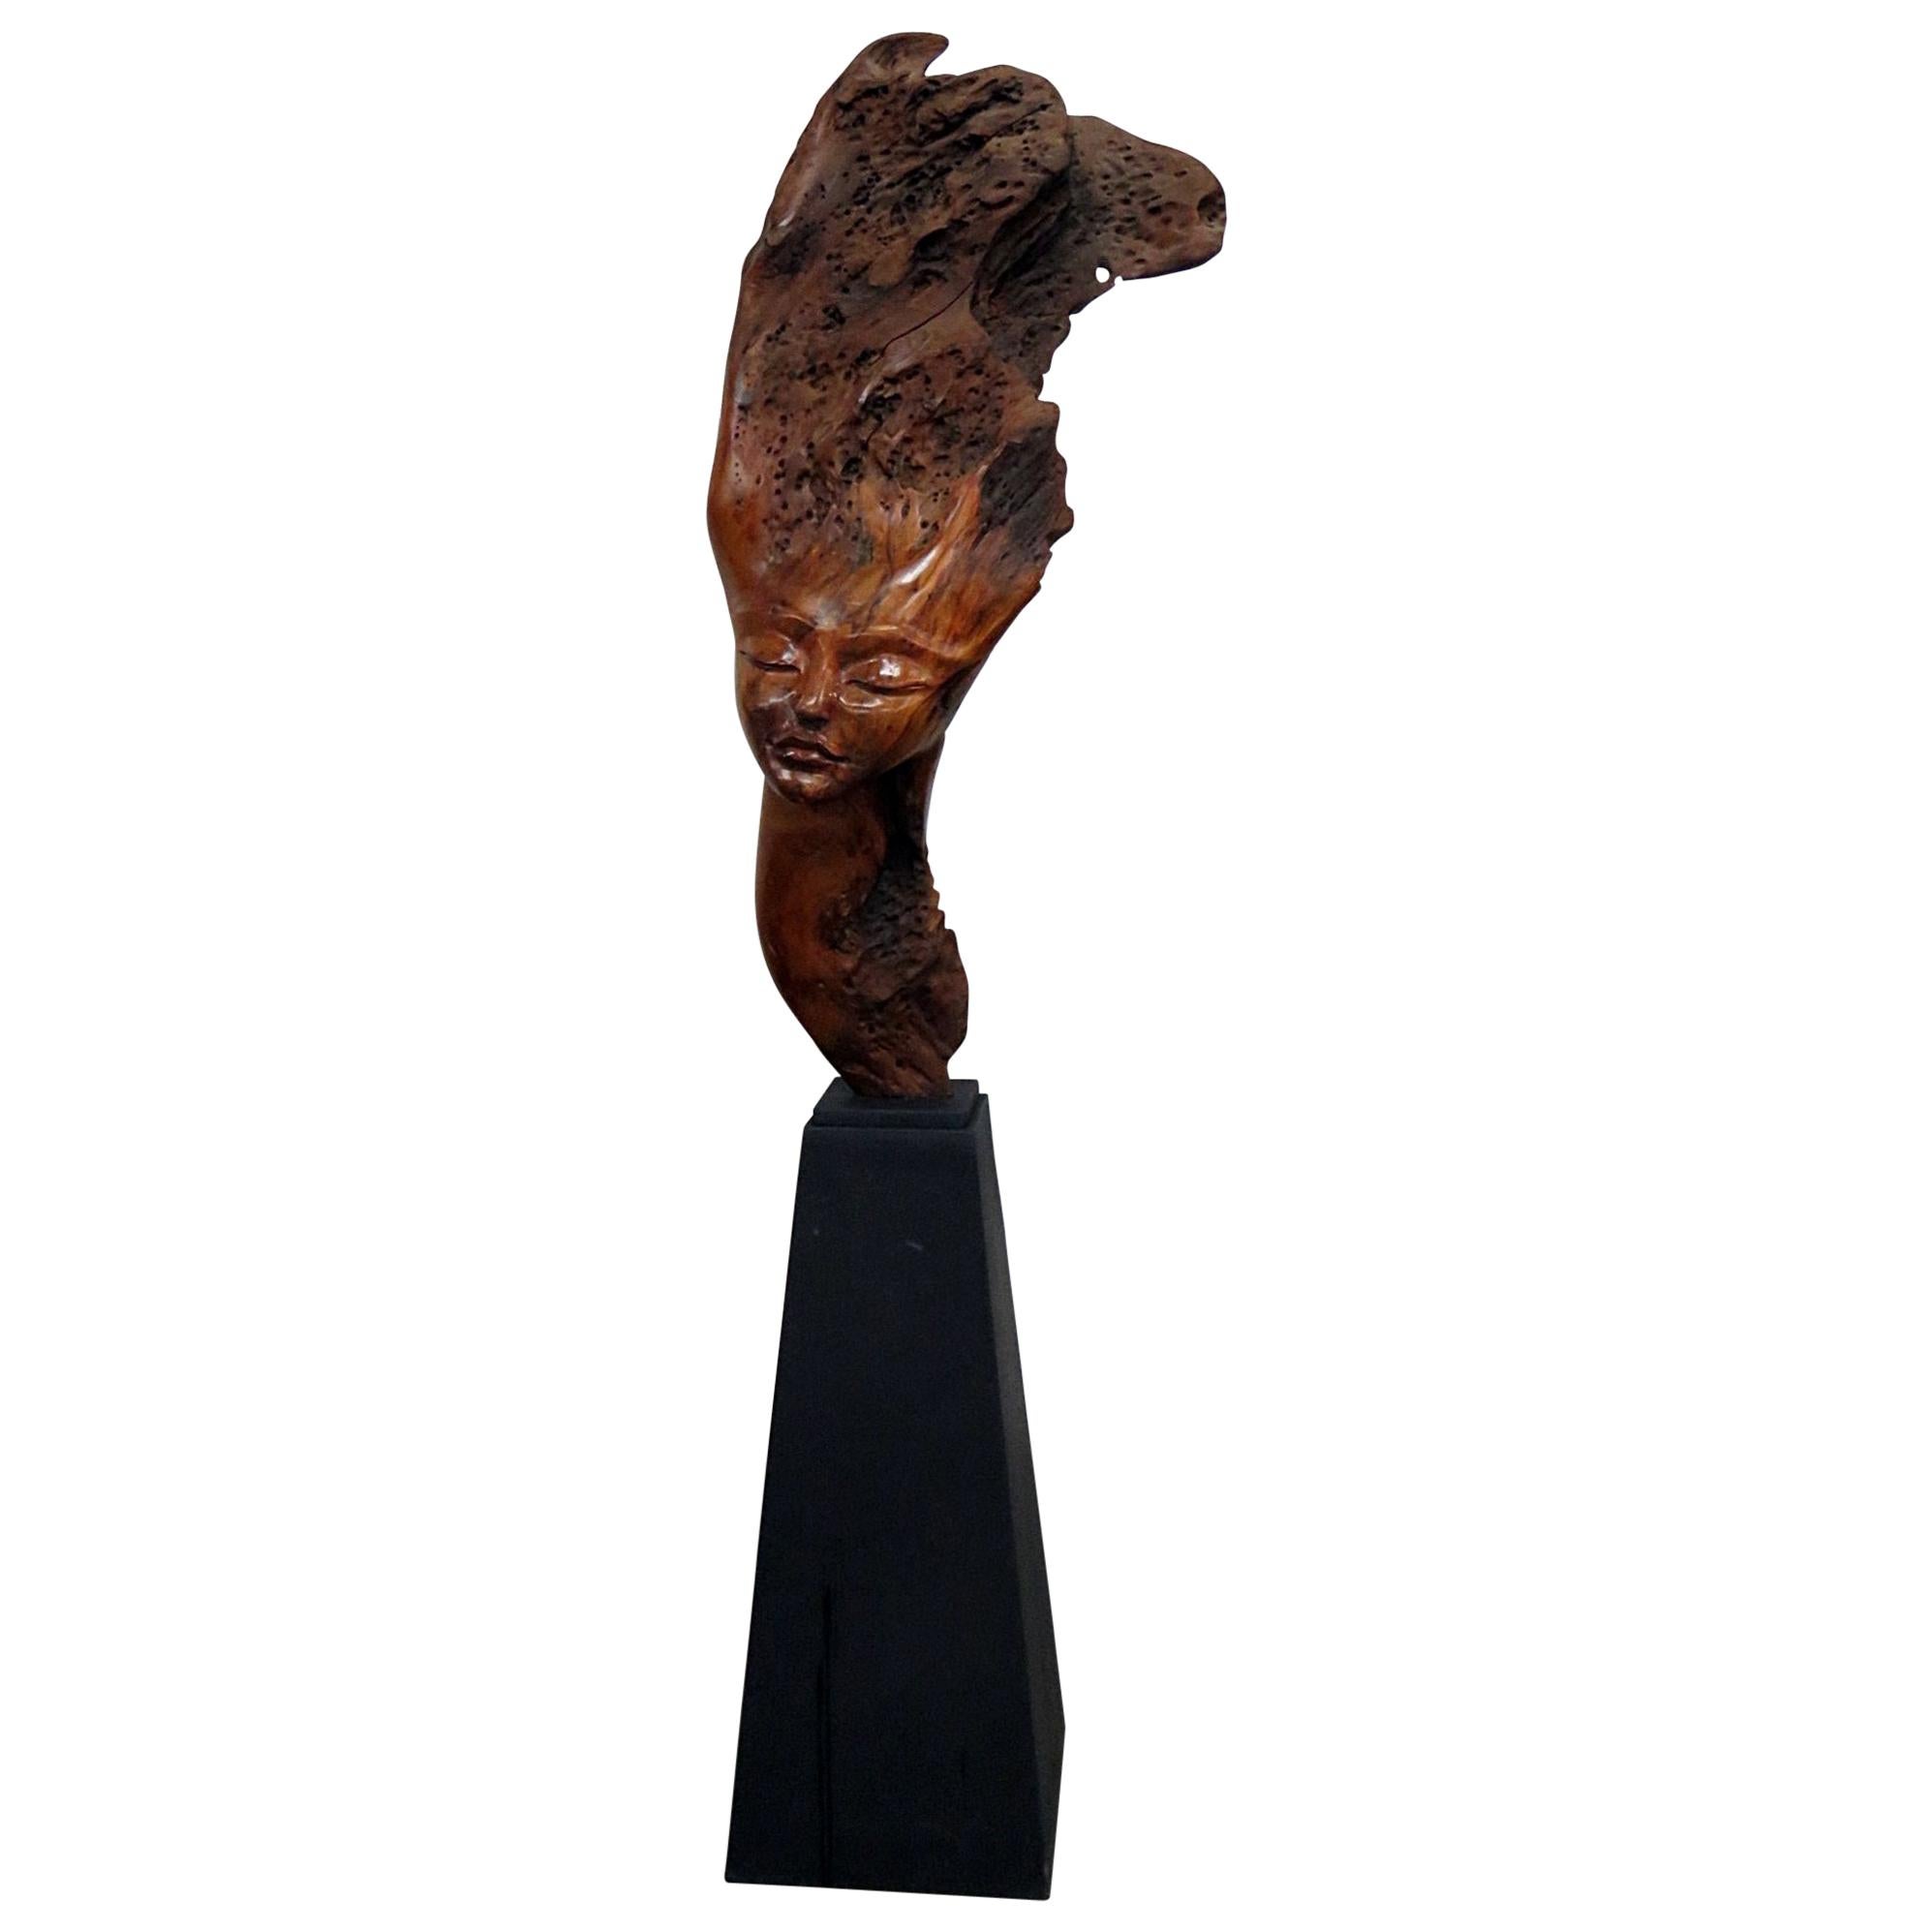 Signed Wooden Sculpture on Stand